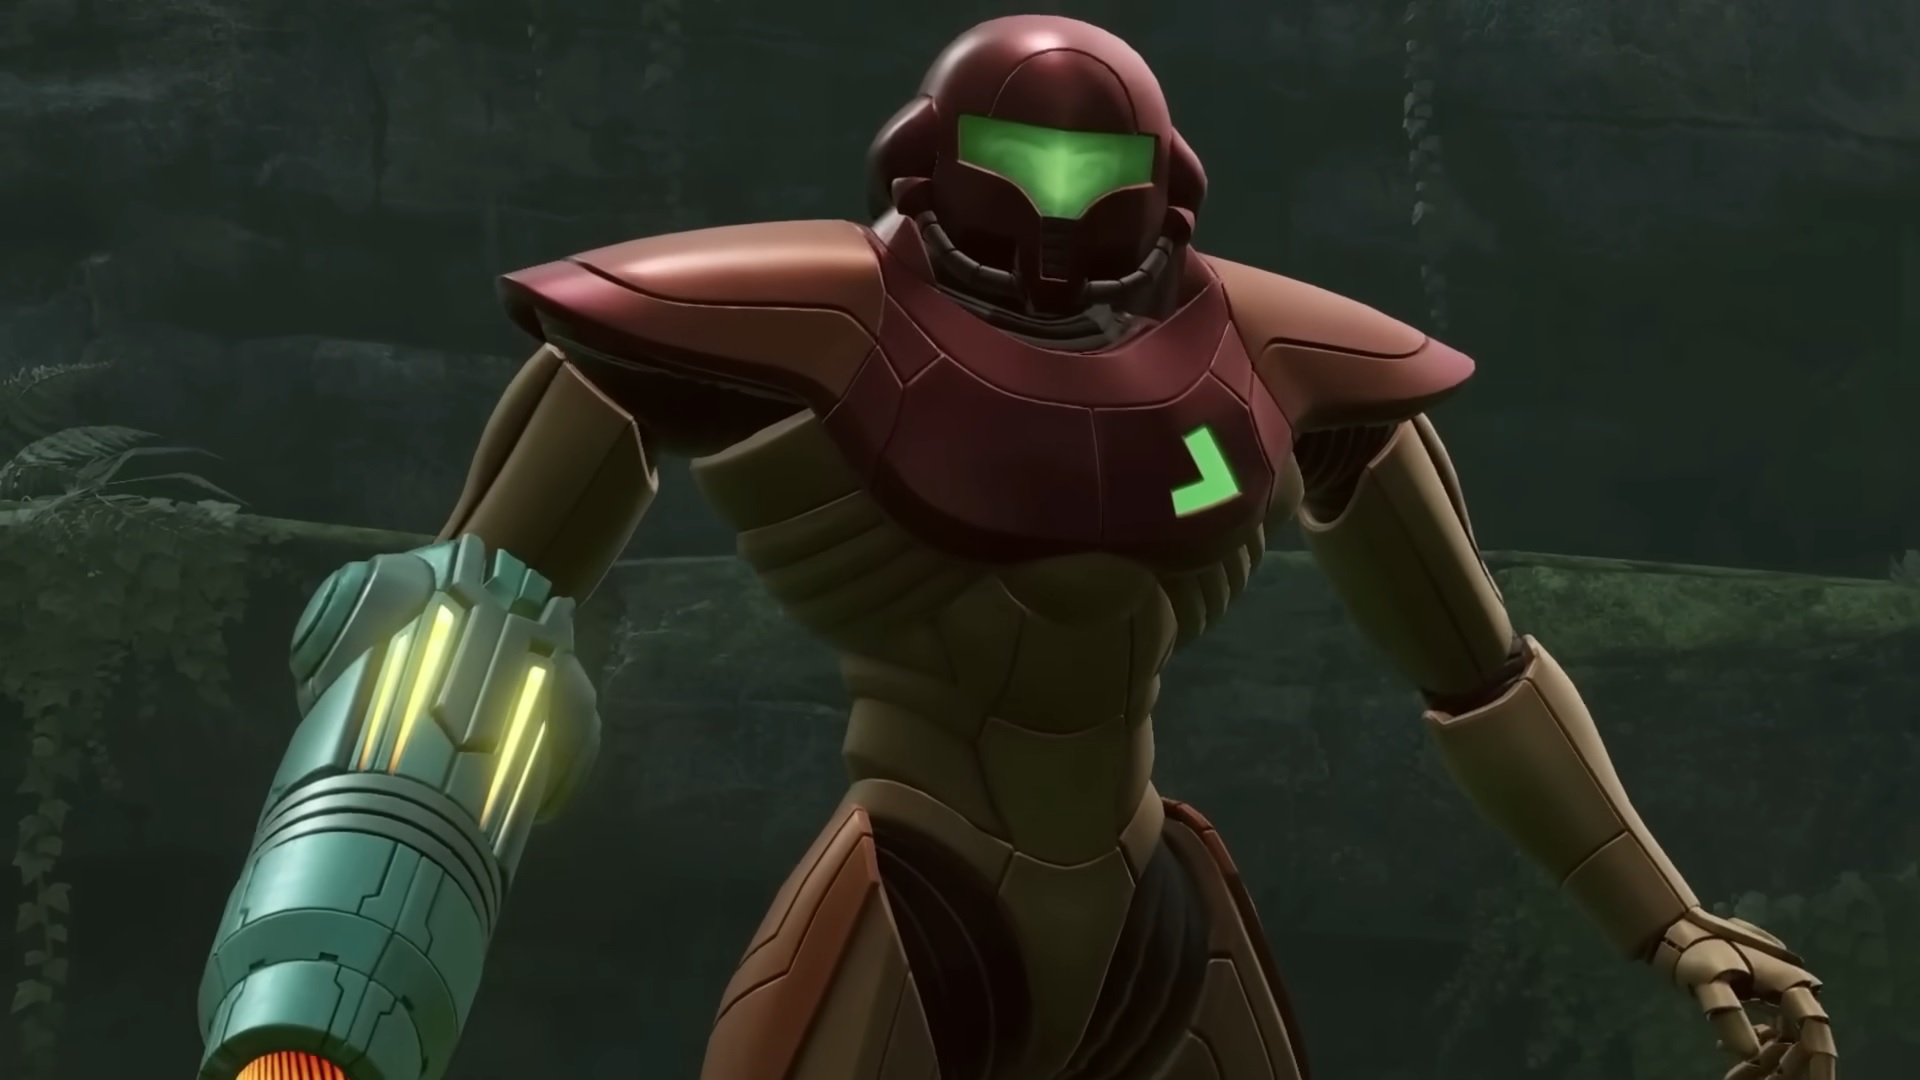 is metroid prime remastered worth it